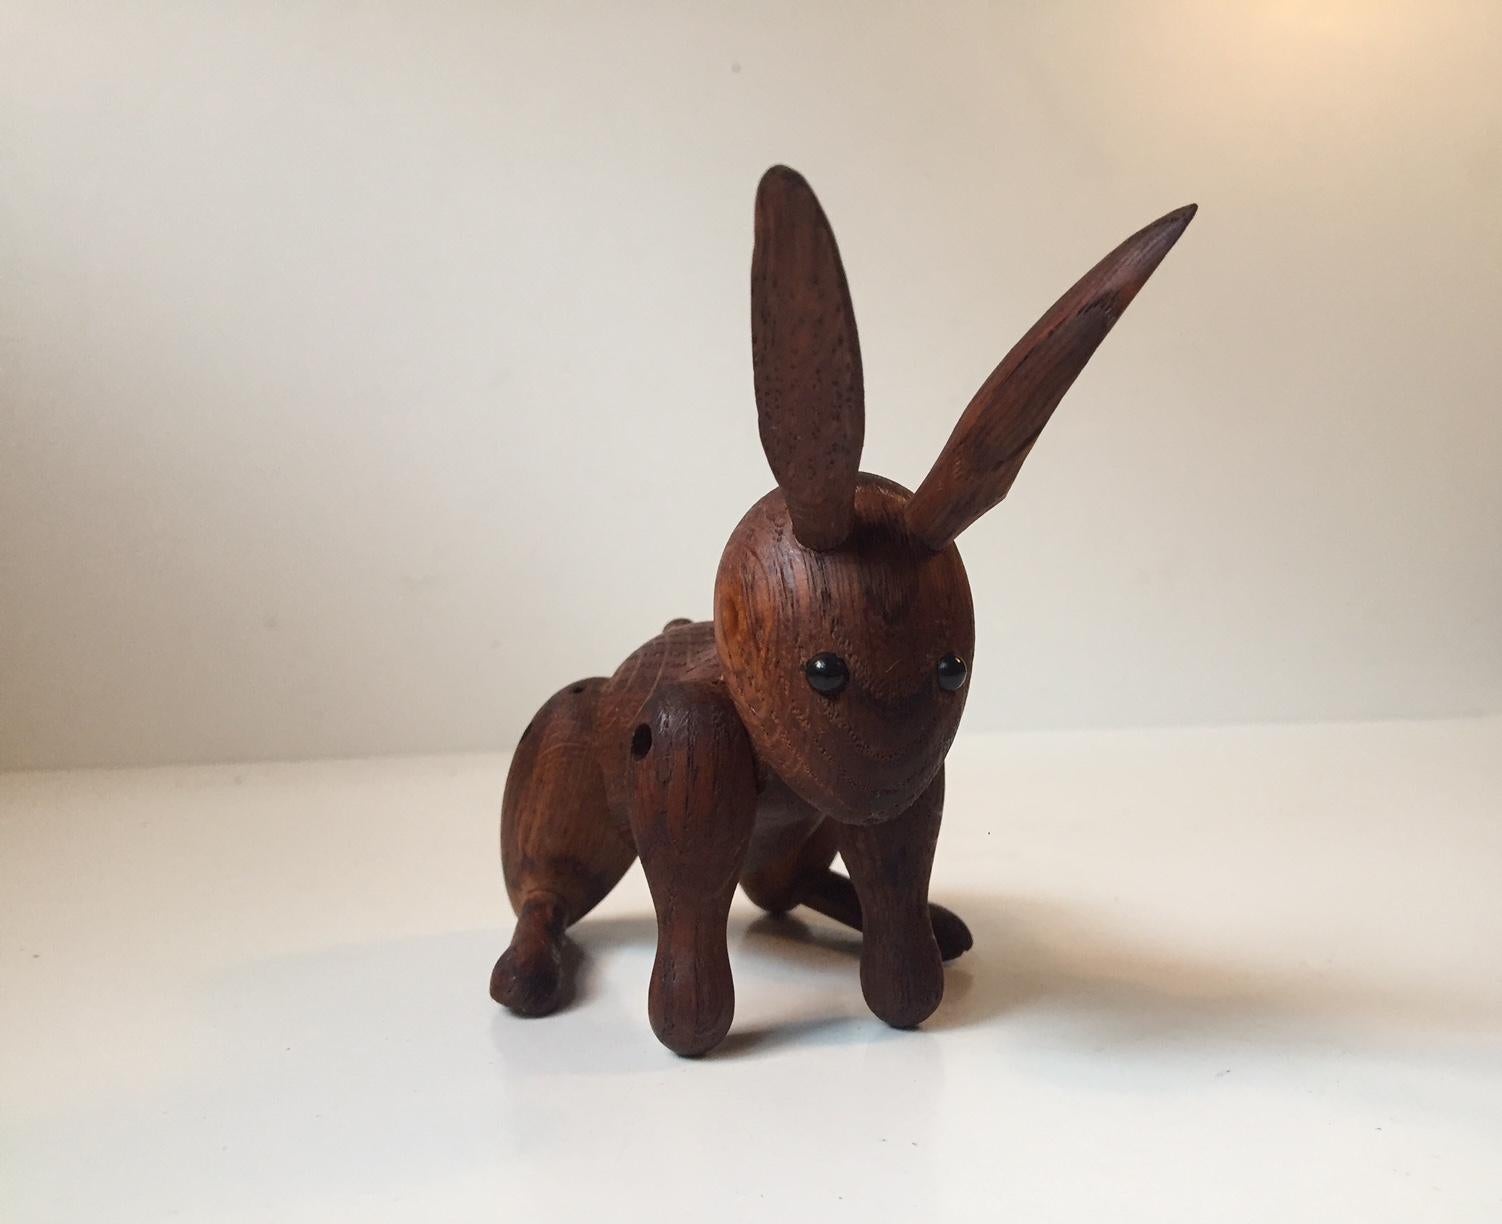 Vintage rabbit figurine or toy by Kay Bojesen. It was designed in 1957. This is an example from the 1960s fashioned out of oak. It has a rich and dark patina.